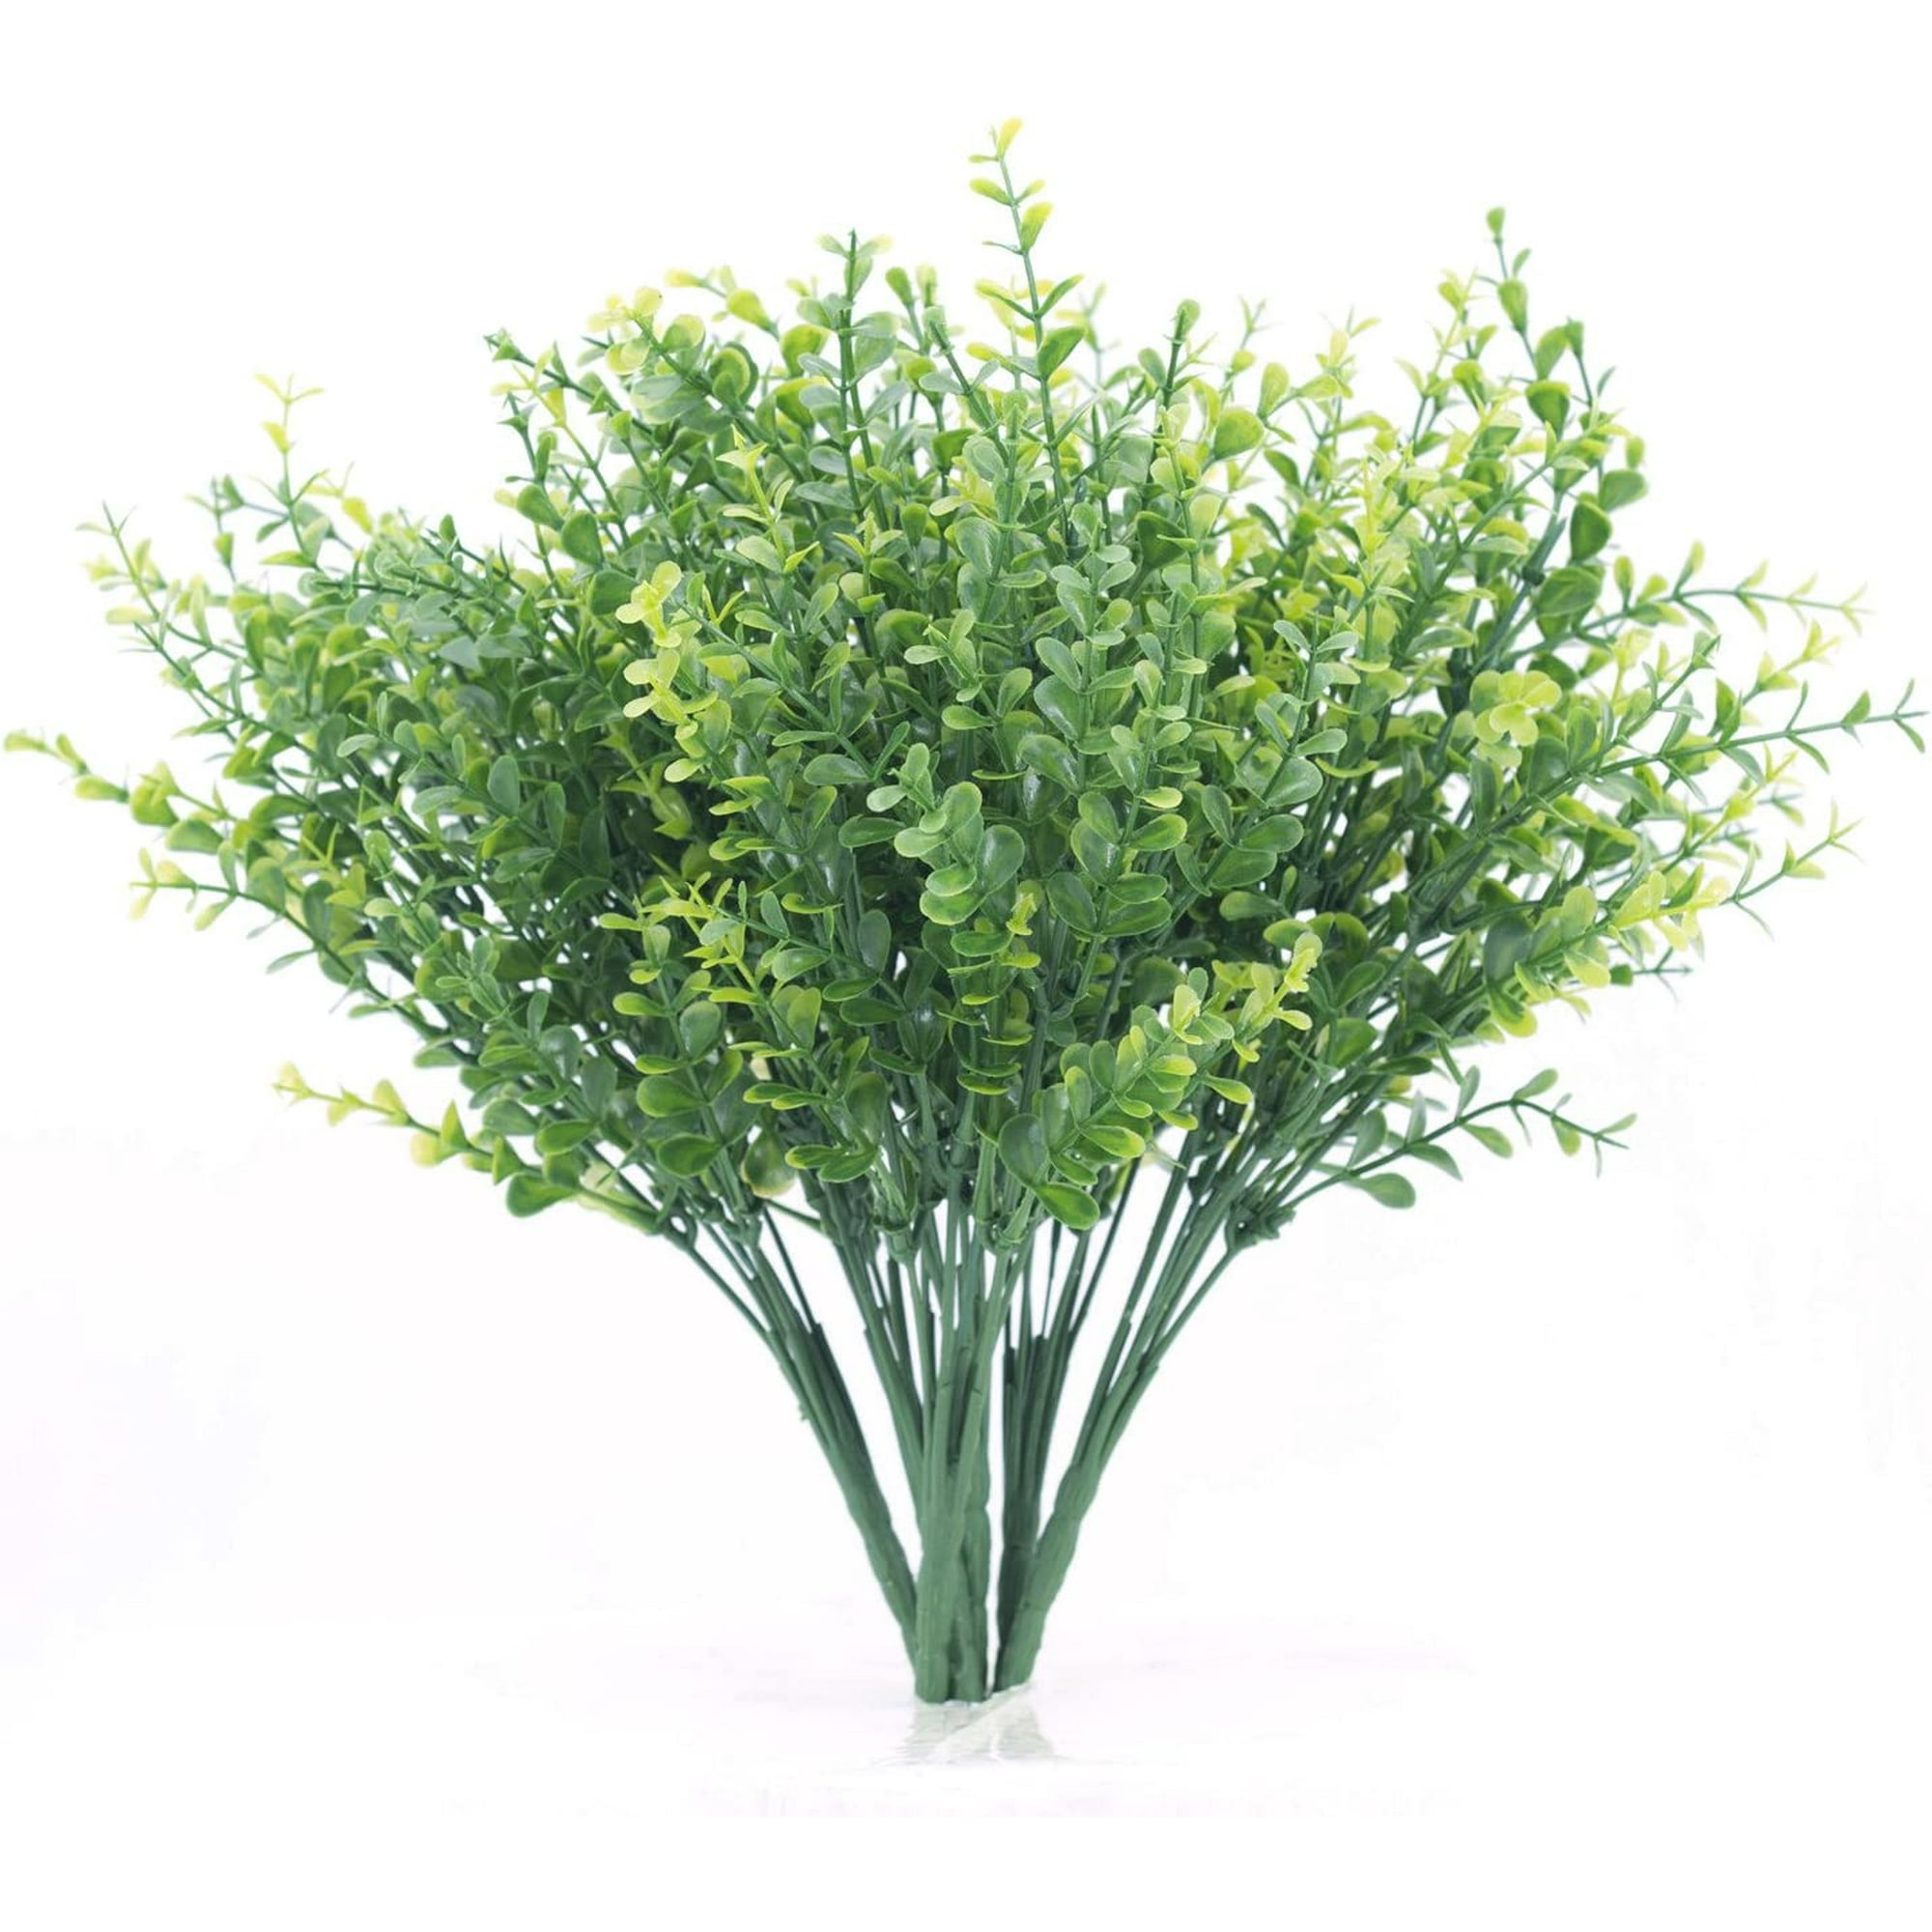 Simulated Green Plants, Spring Grass, Camellia, Water Grass, Stars